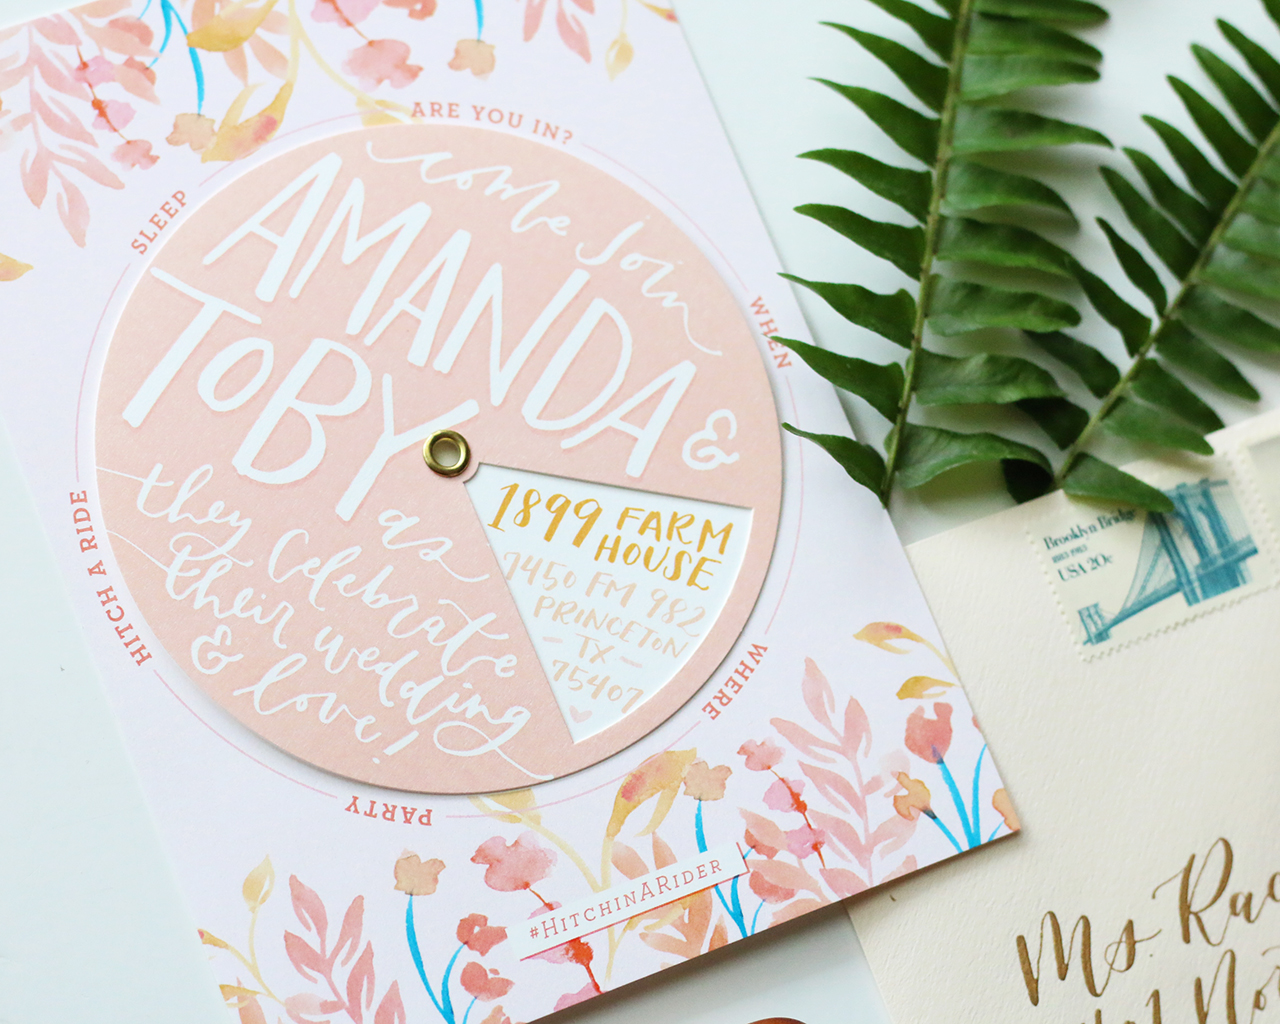 Playful Floral Pinwheel Wedding Invitations by Goldie Design Co.